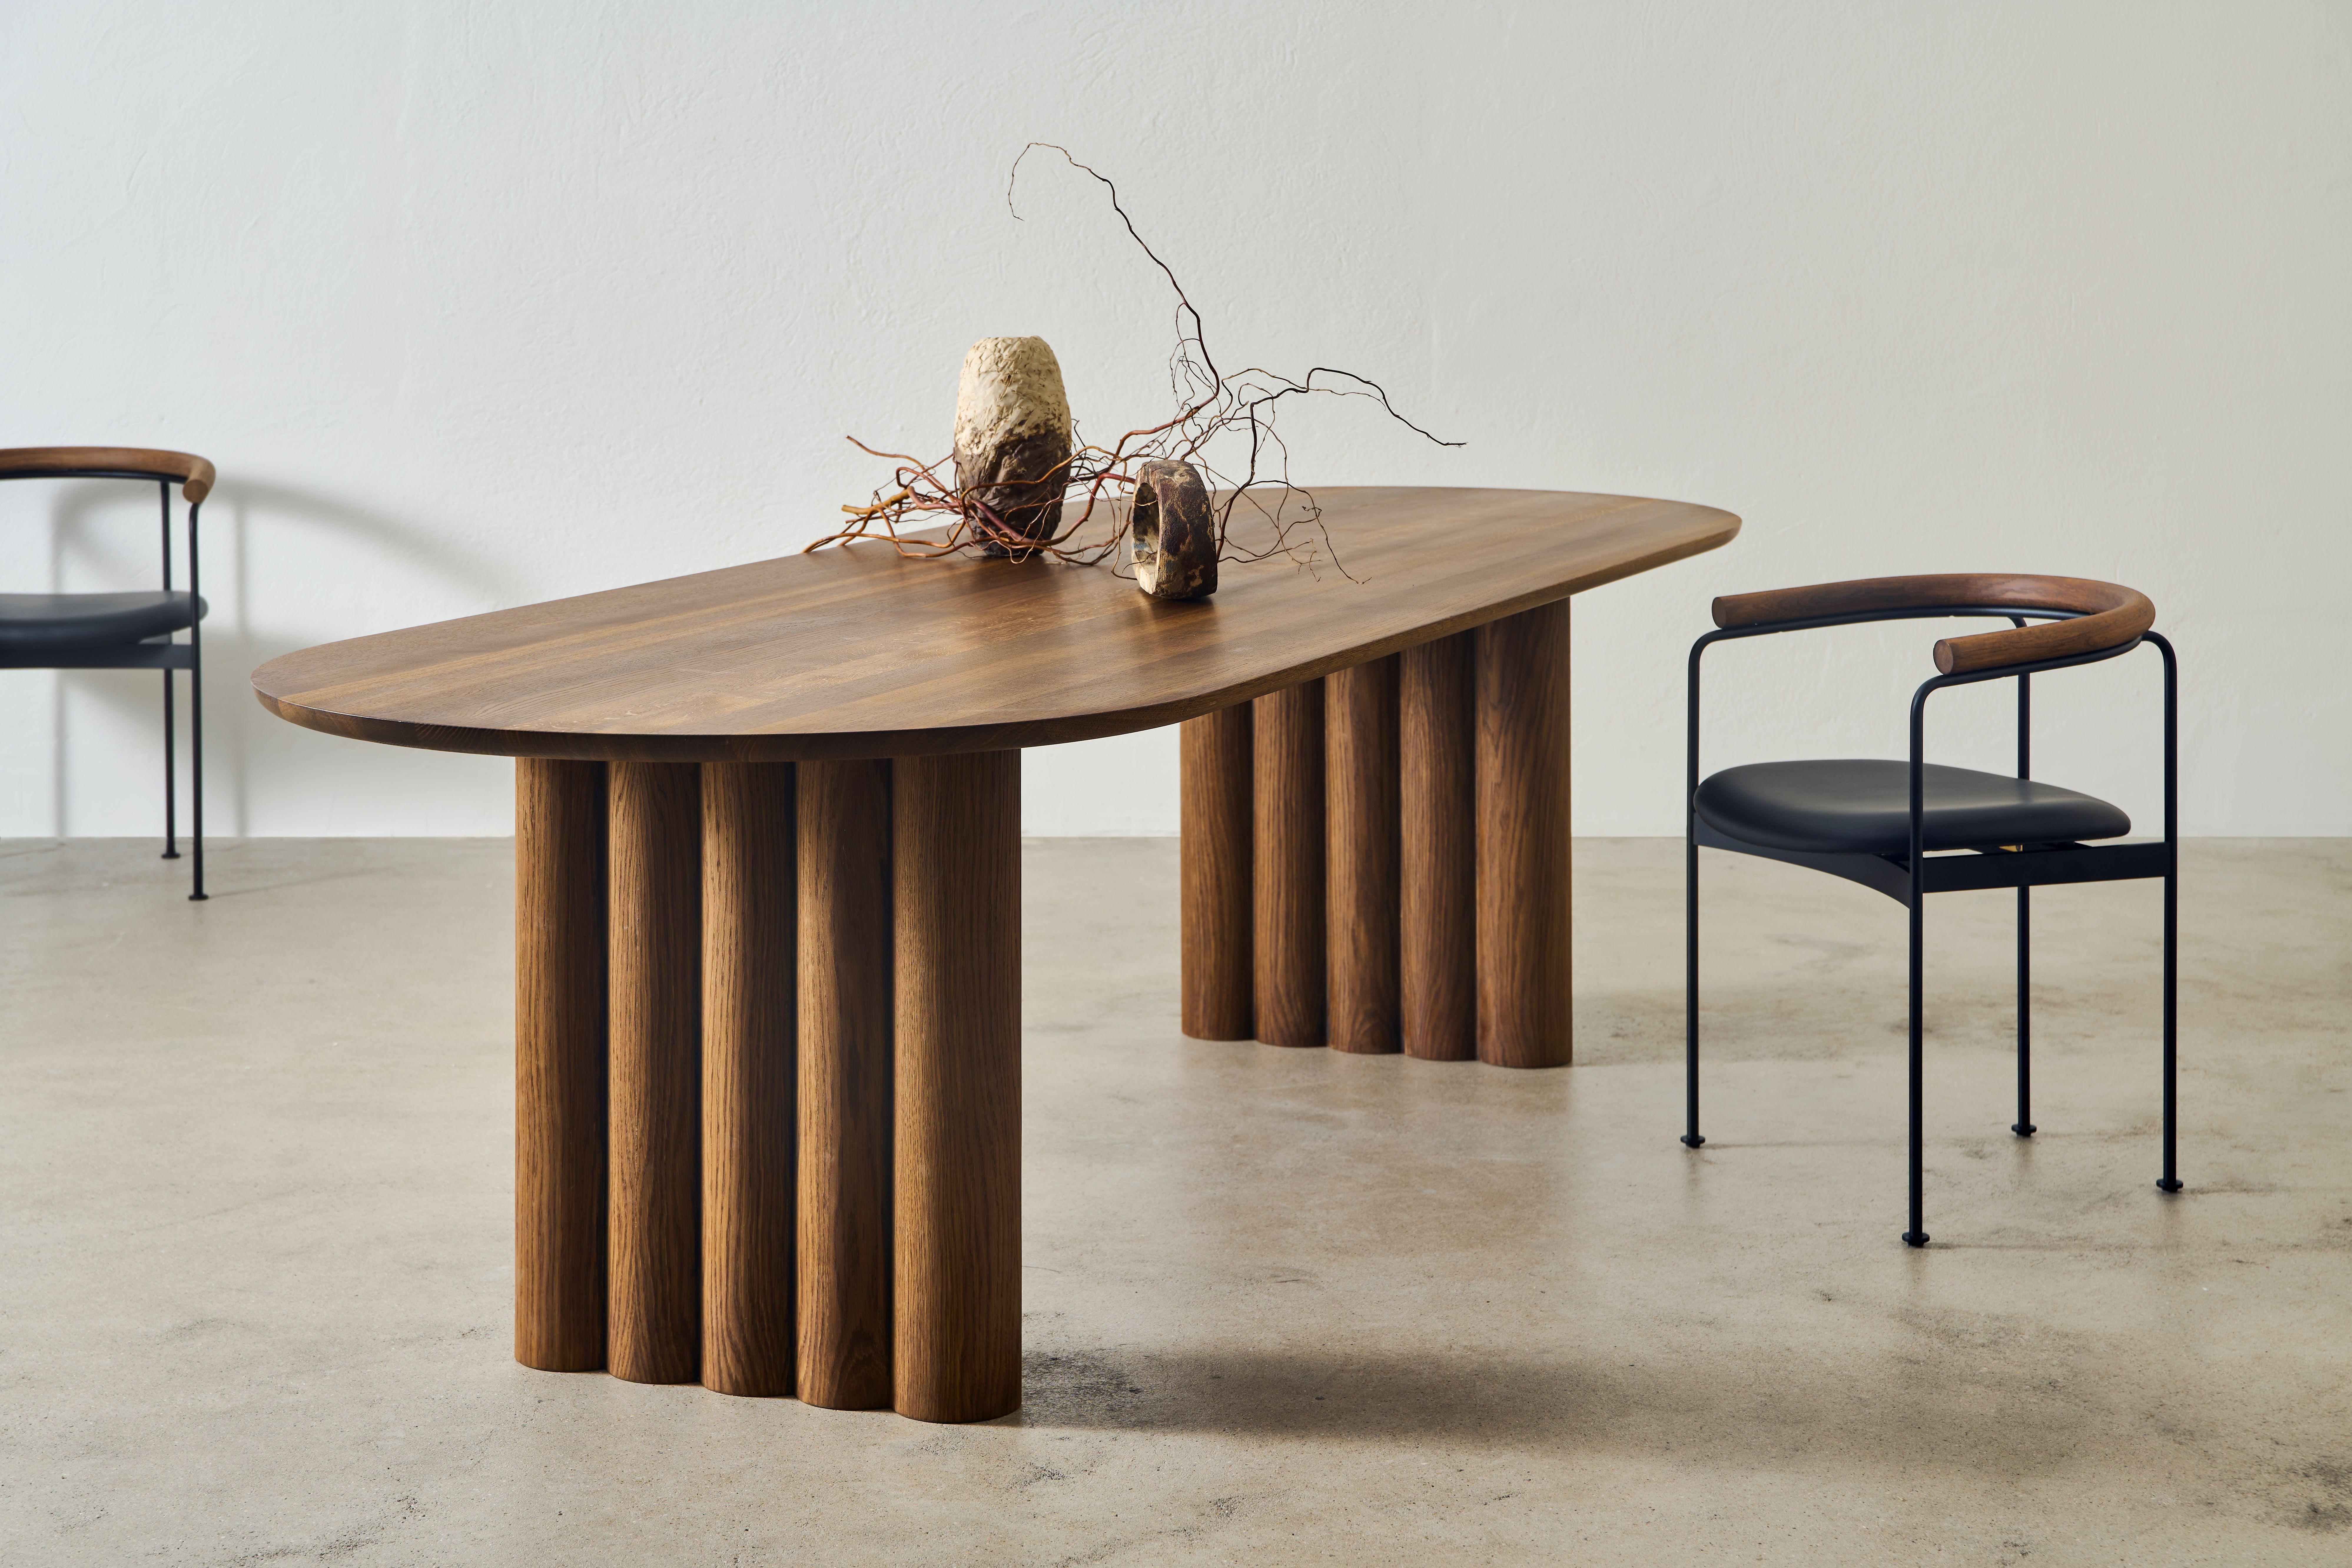 PLUSH dining table, oval, 240 cm.
Color: Light Oak 
Solid wood table top and legs. Handmade in Denmark. 
Signed by Jacob Plejdrup for DK3

Table's height: 72 or 74 cm
Table top’s thickness: 30 (in picture) or 40mm
Legs width: 130mm (in picture) or